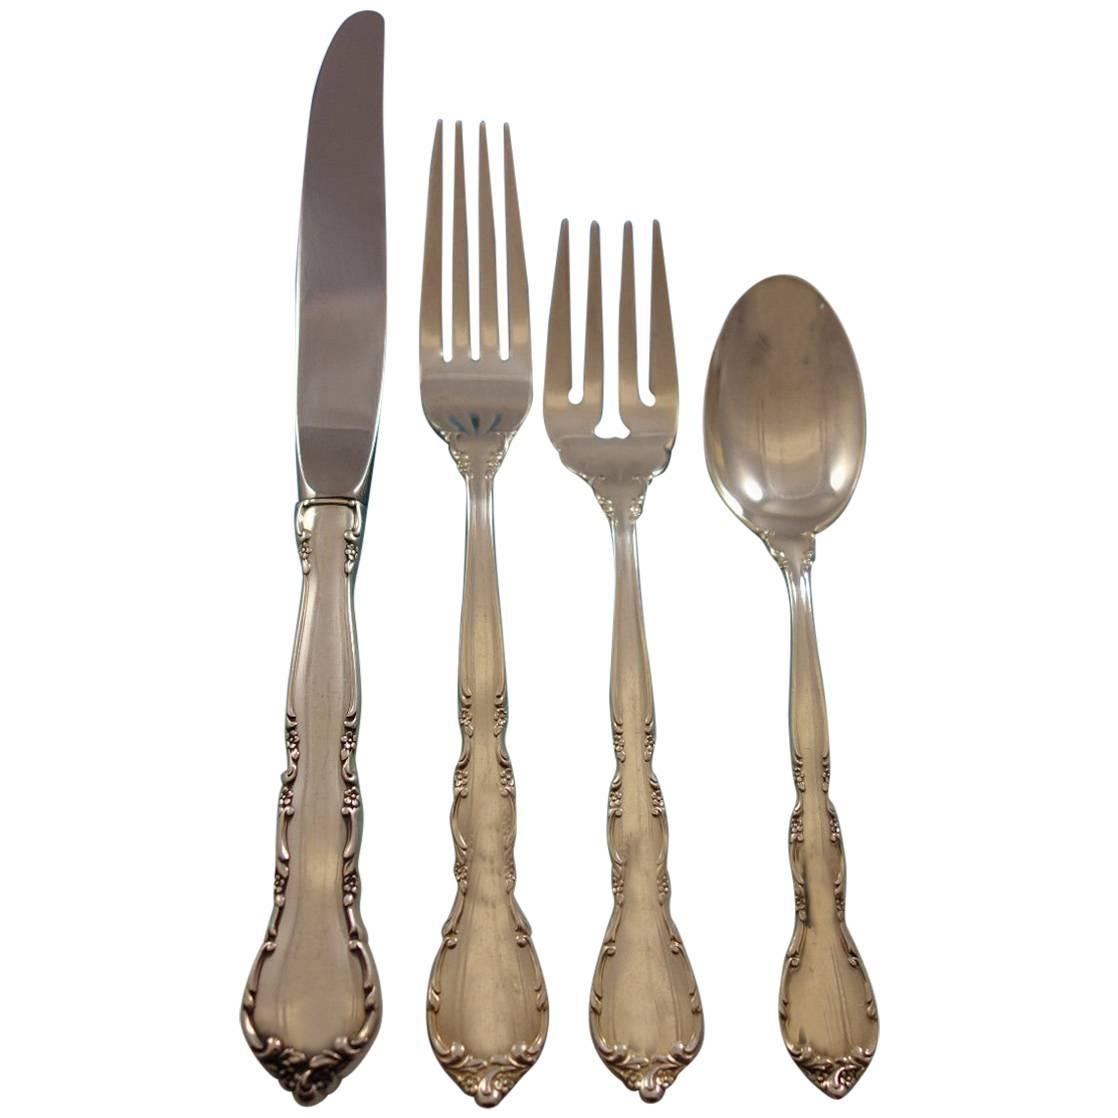 Mignonette by Lunt sterling silver flatware set, 109 pieces. This set includes: 

12 knives, 9 1/8